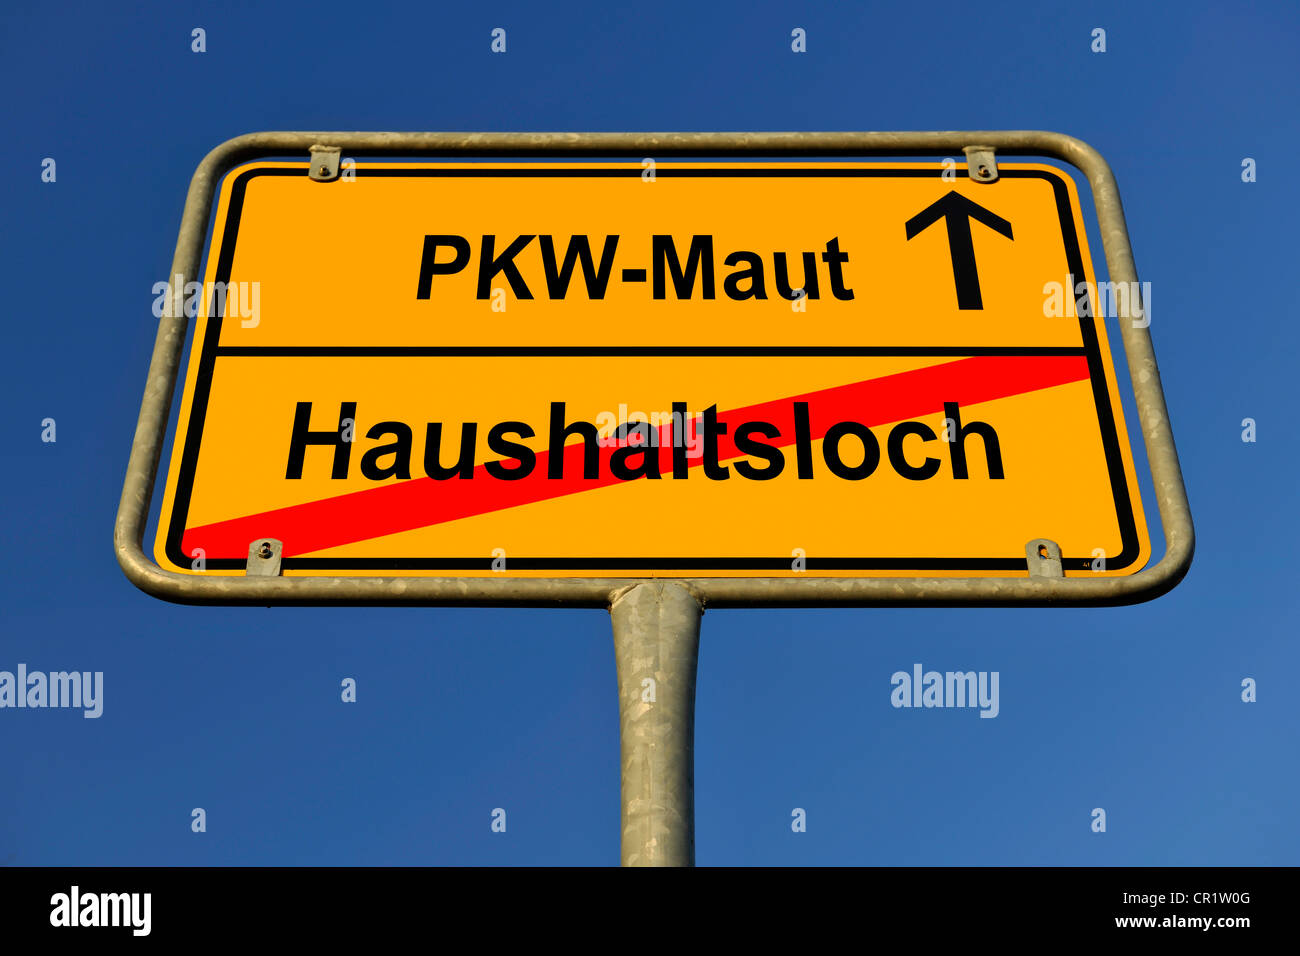 City limit sign, symbolic image for filling a Haushaltsloch with a Pkw-Maut, German for filling a budget deficit with a car toll Stock Photo